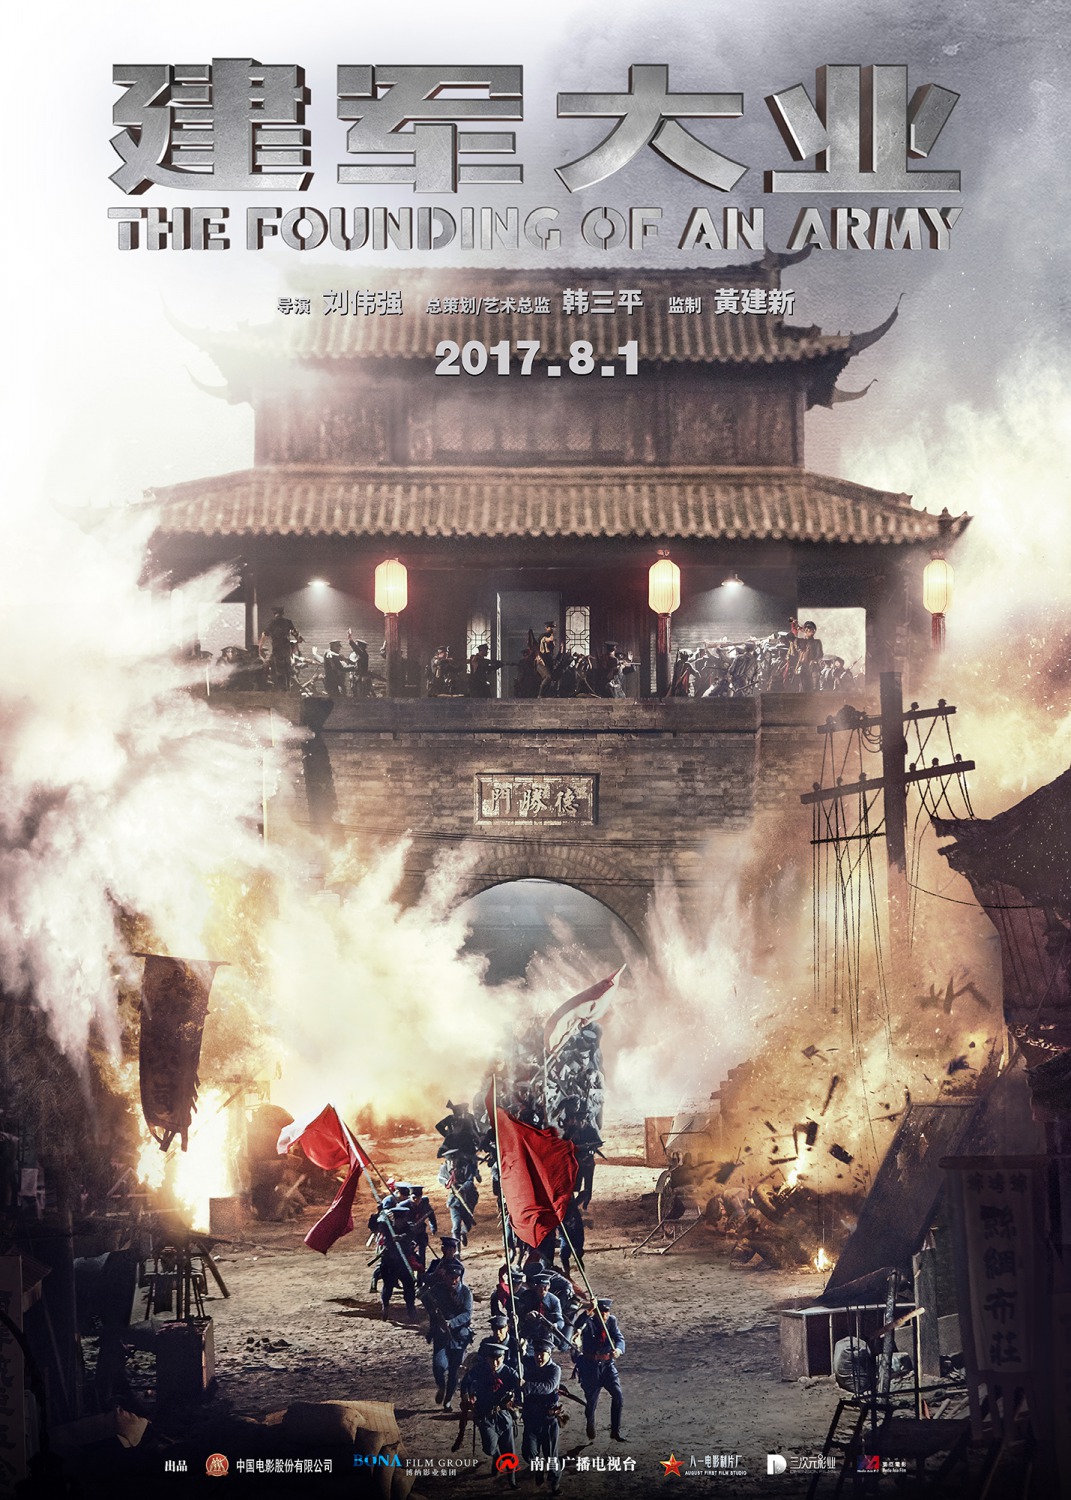 Extra Large Movie Poster Image for The Founding of an Army 